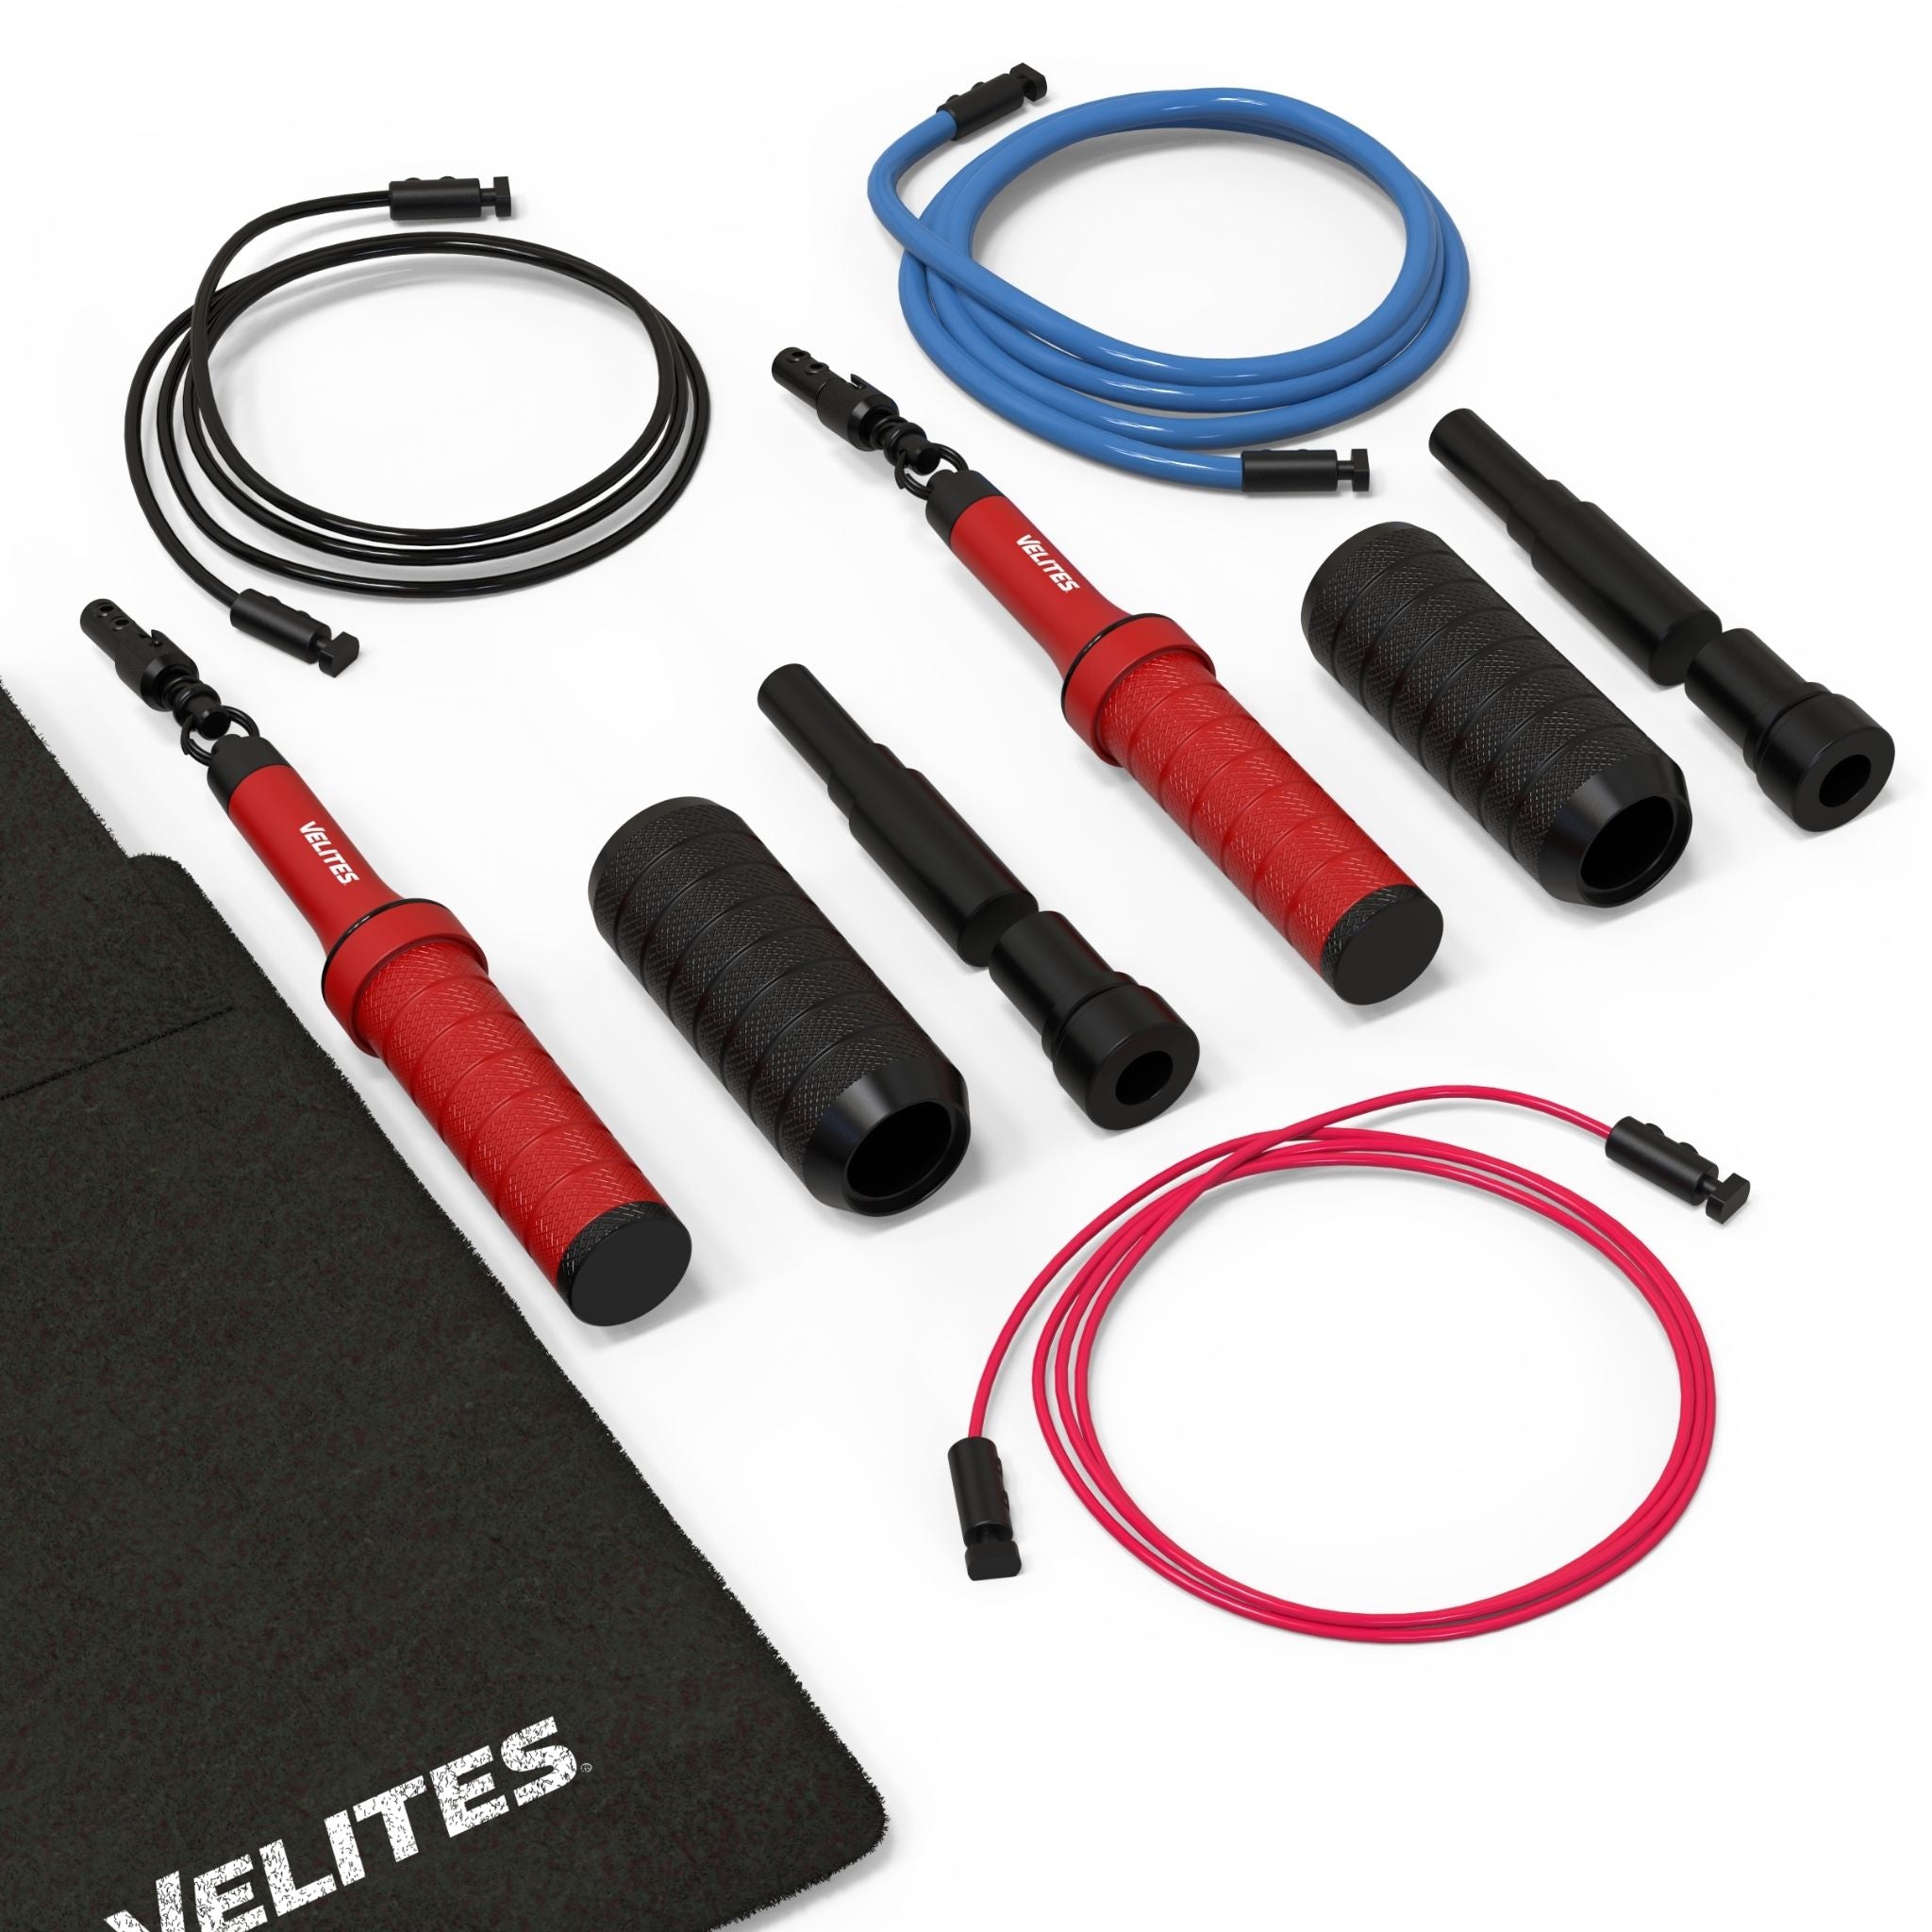 Pack Comba Earth 2.0 Velites + Lastres + Cables + Mat